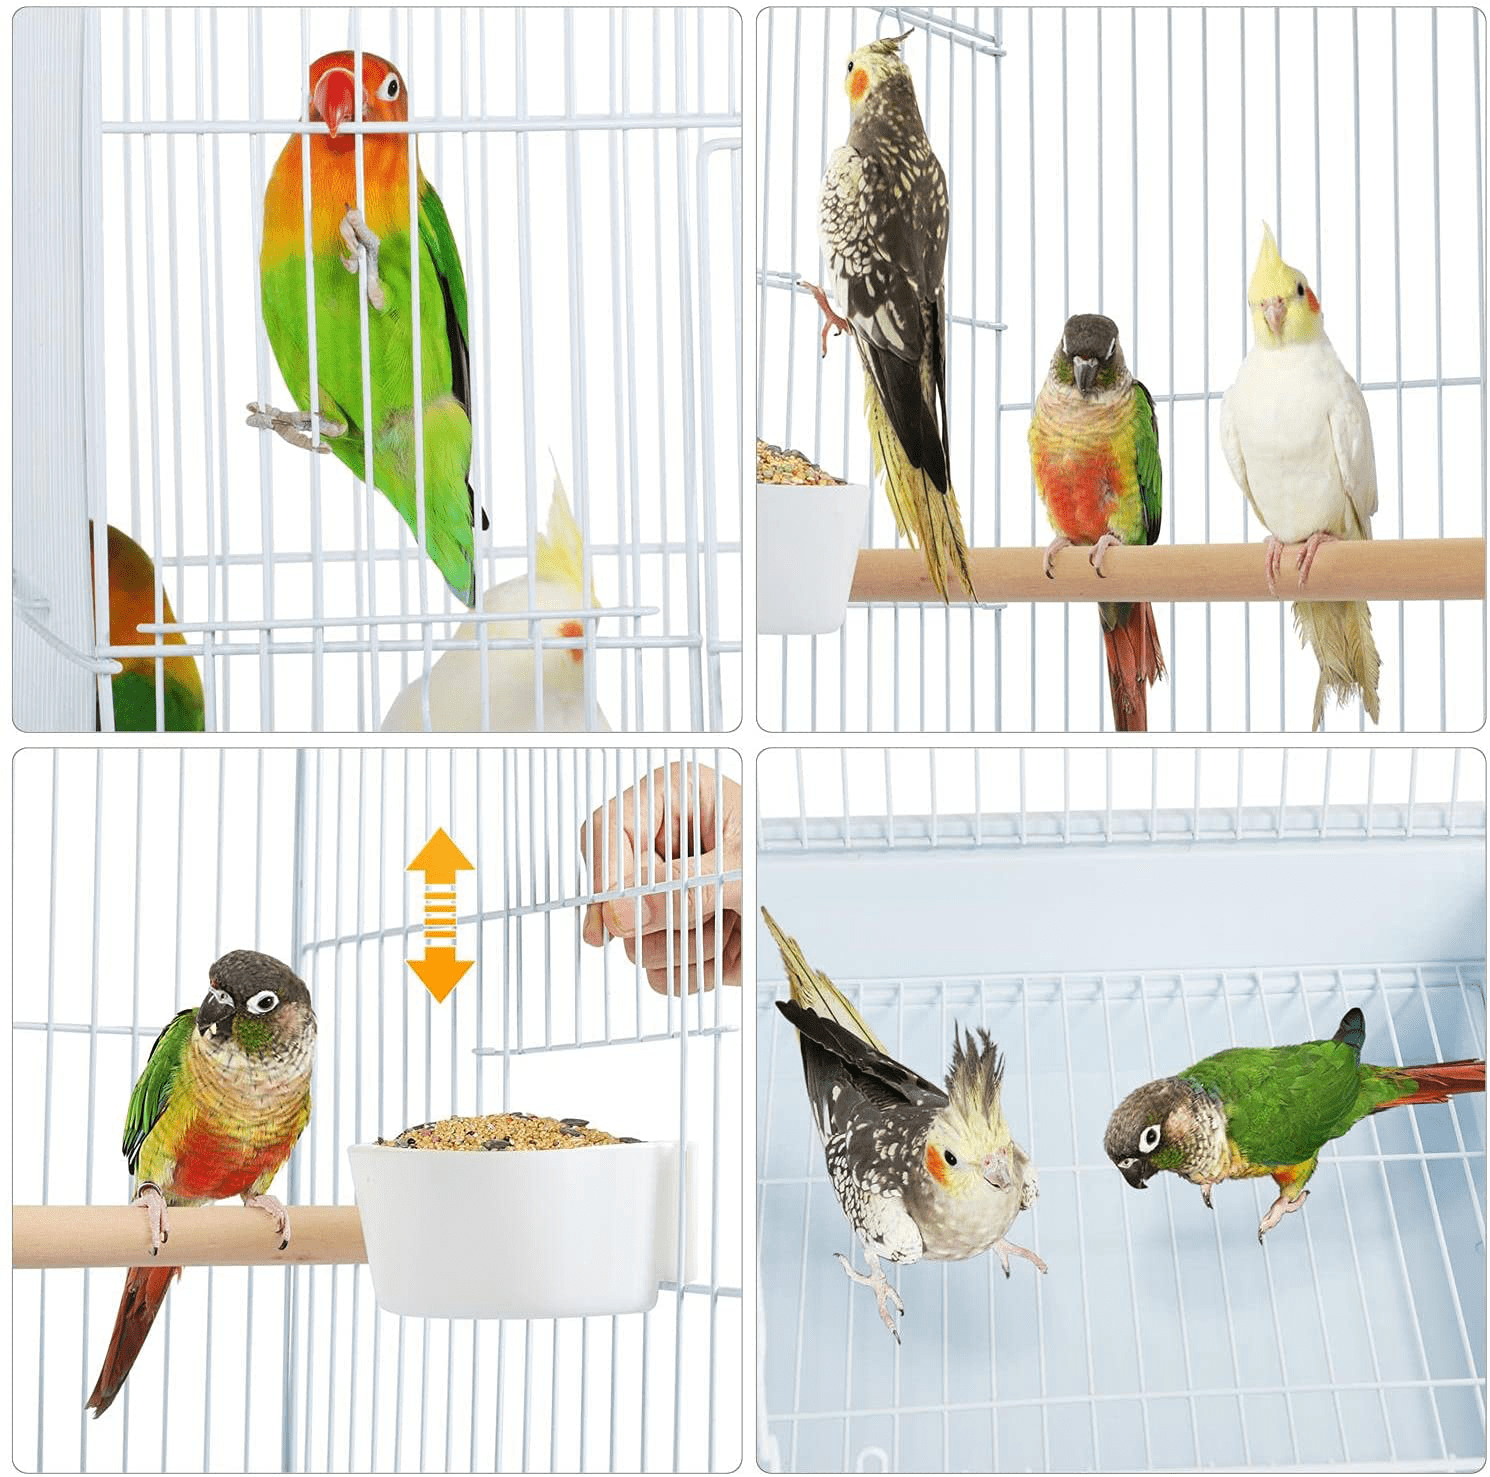 Yaheetech Play Open Top Bird Cages for Small Parrots Green Cheek Conure Lovebirds with Detachable Rolling Stand, White Animals & Pet Supplies > Pet Supplies > Bird Supplies > Bird Cages & Stands Yaheetech   